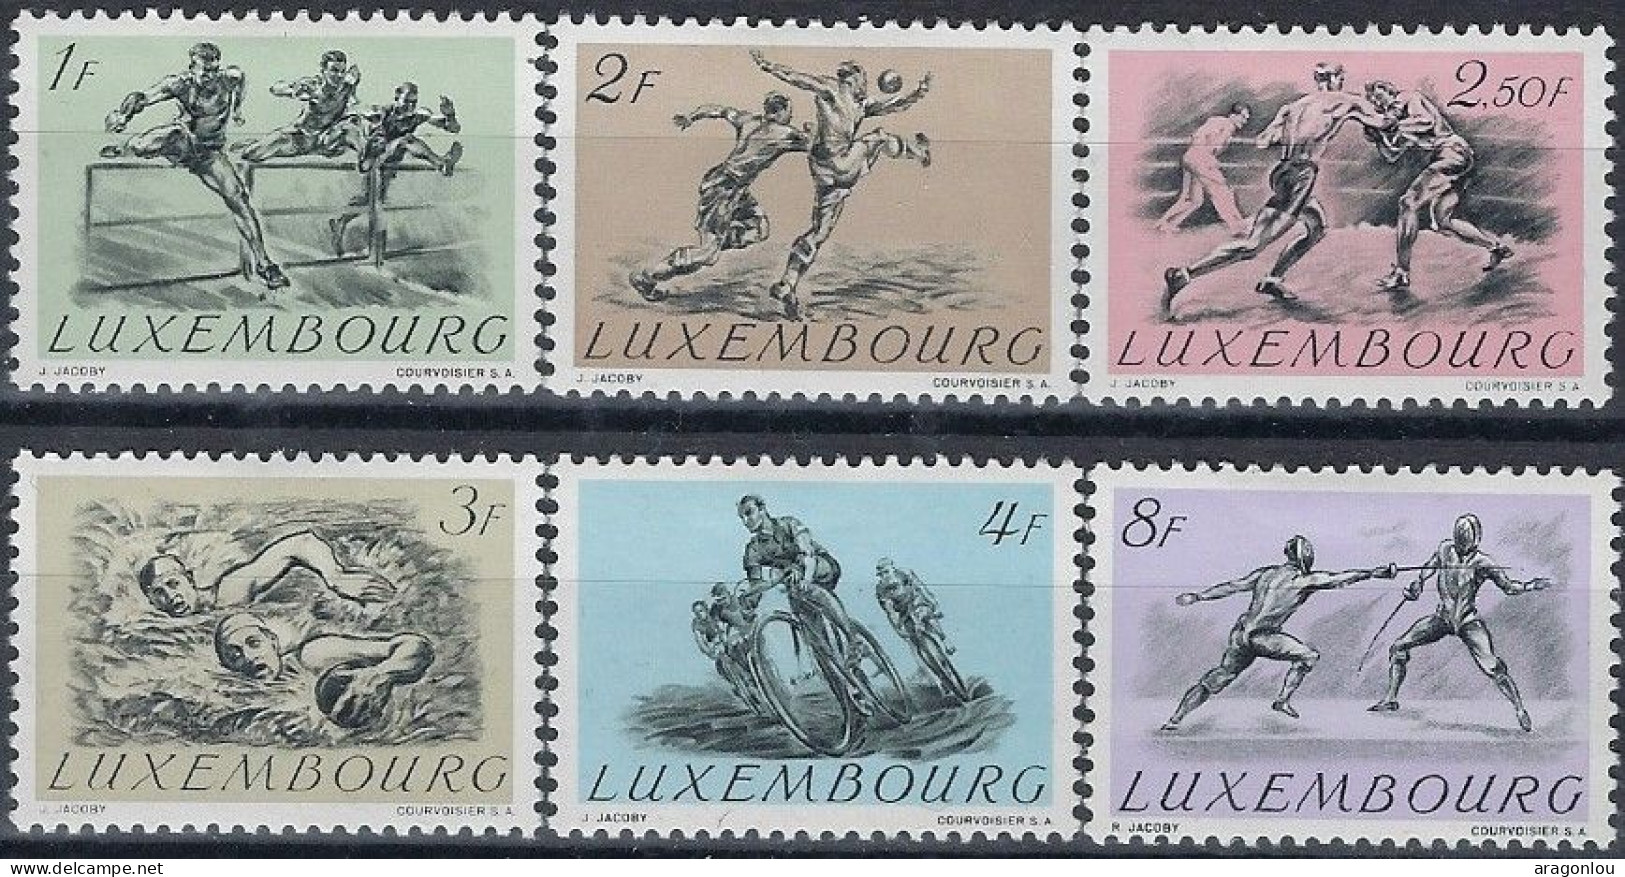 Luxembourg - Luxemburg -  Timbre   Série  Olympique   1952   VC. 50,-   * - Usati